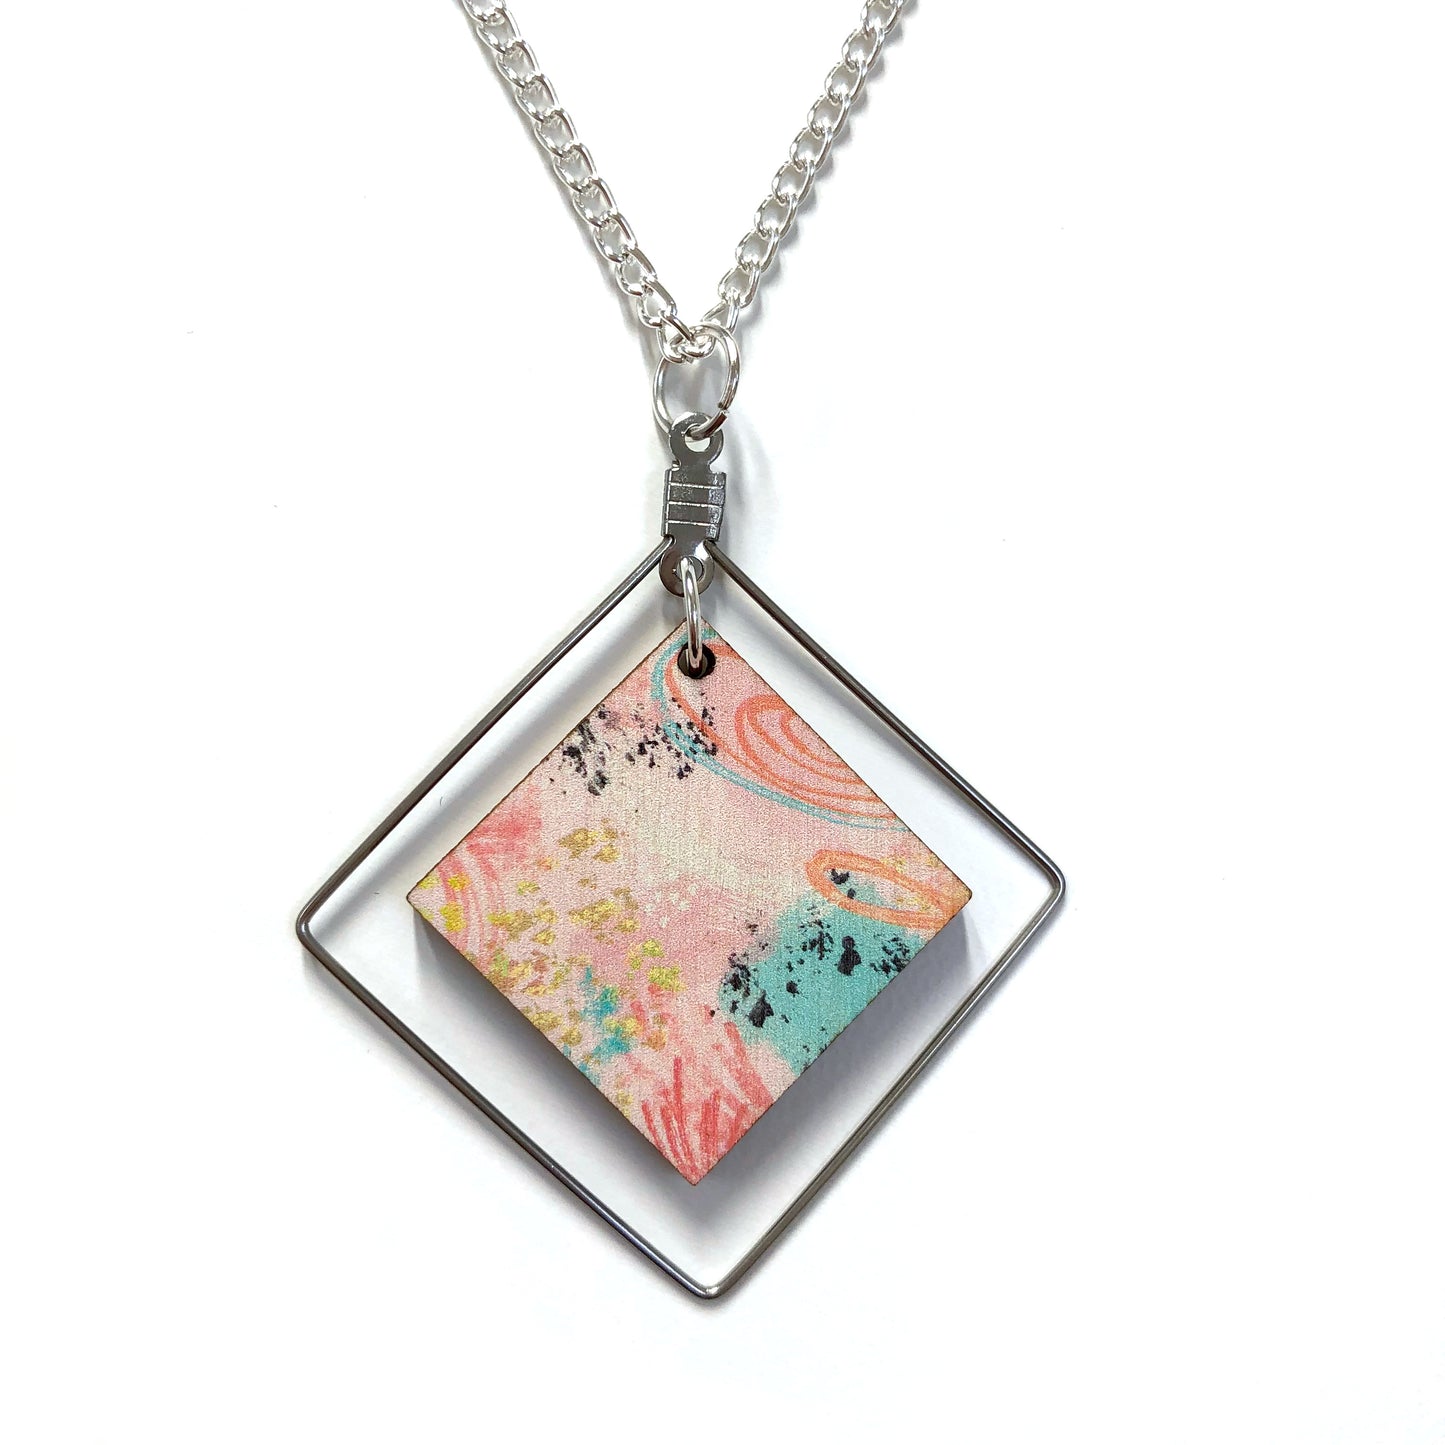 Pink pendant necklace - abstract design